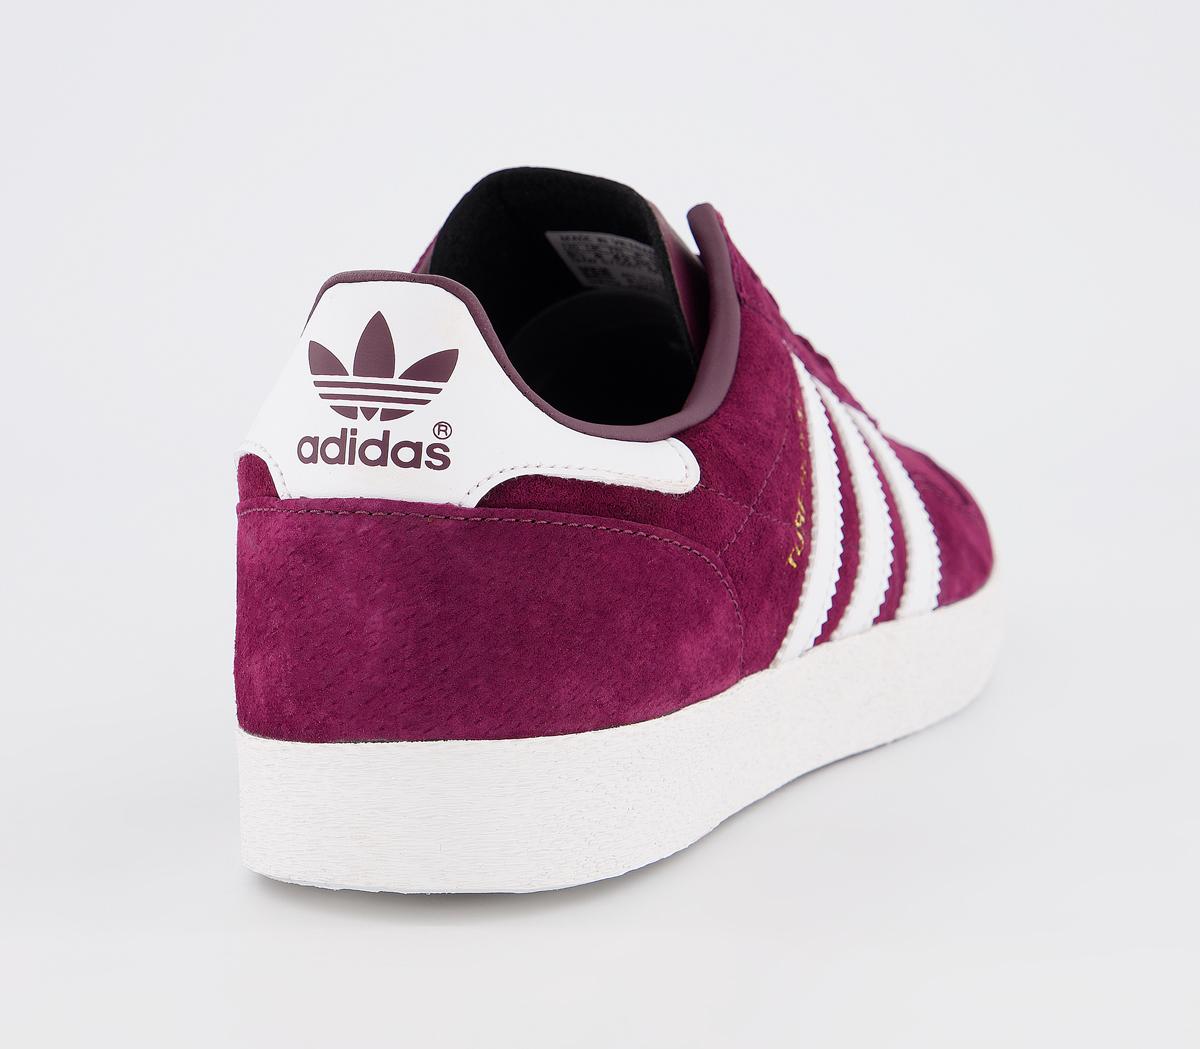 adidas Turf Royal Trainers Maroon White - Women's Trainers